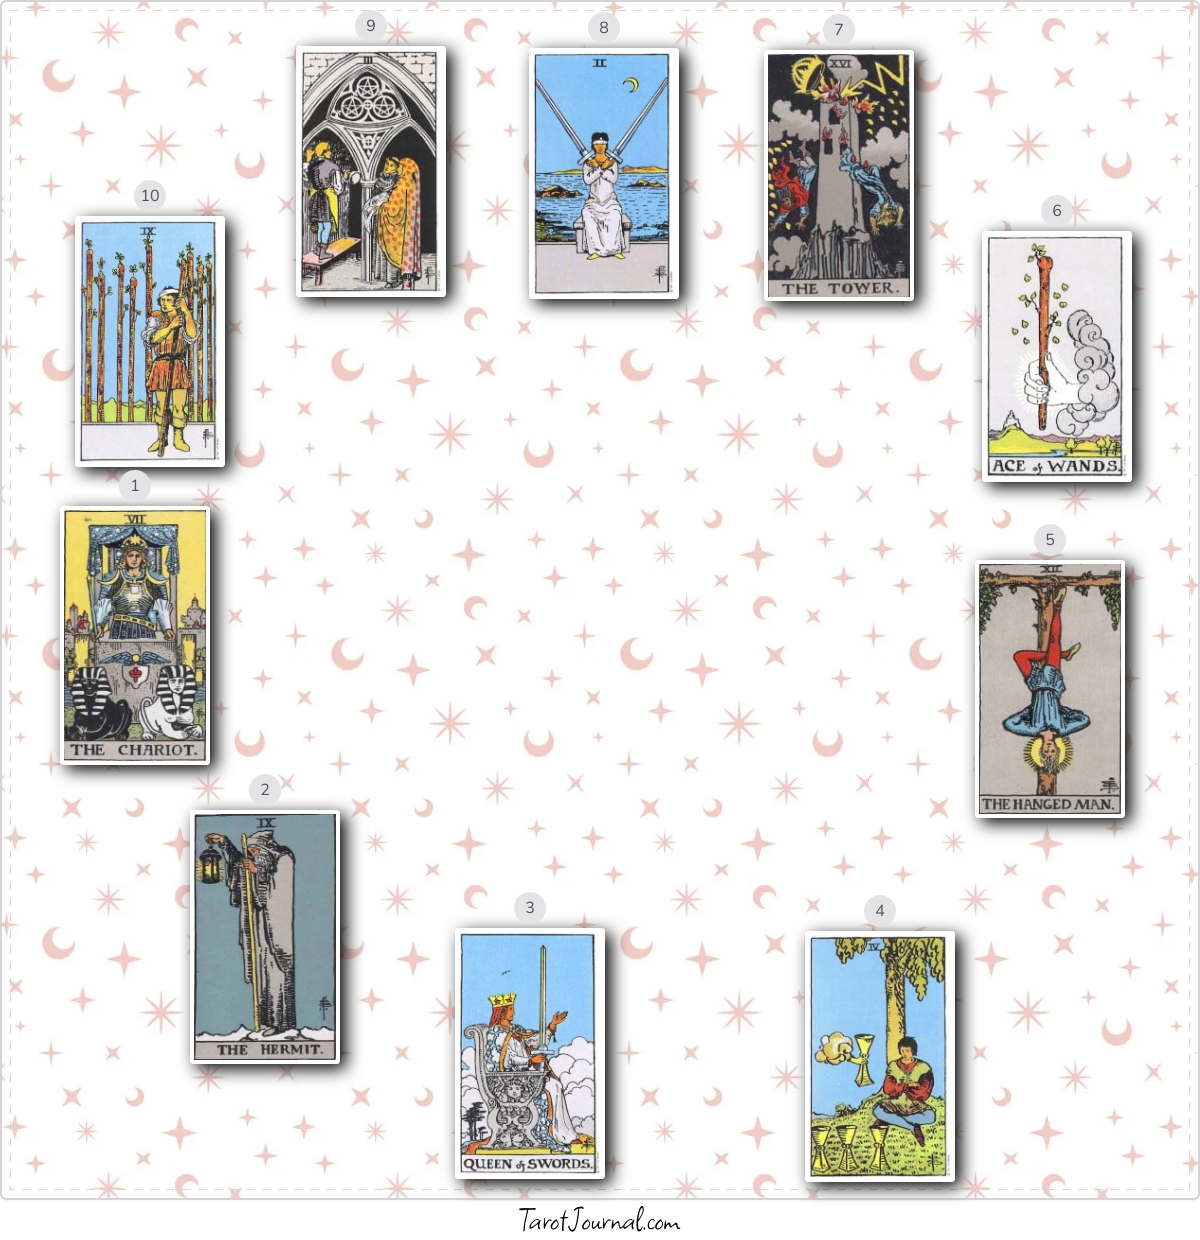 My reading 08/29/23. - tarot reading by Chassidy